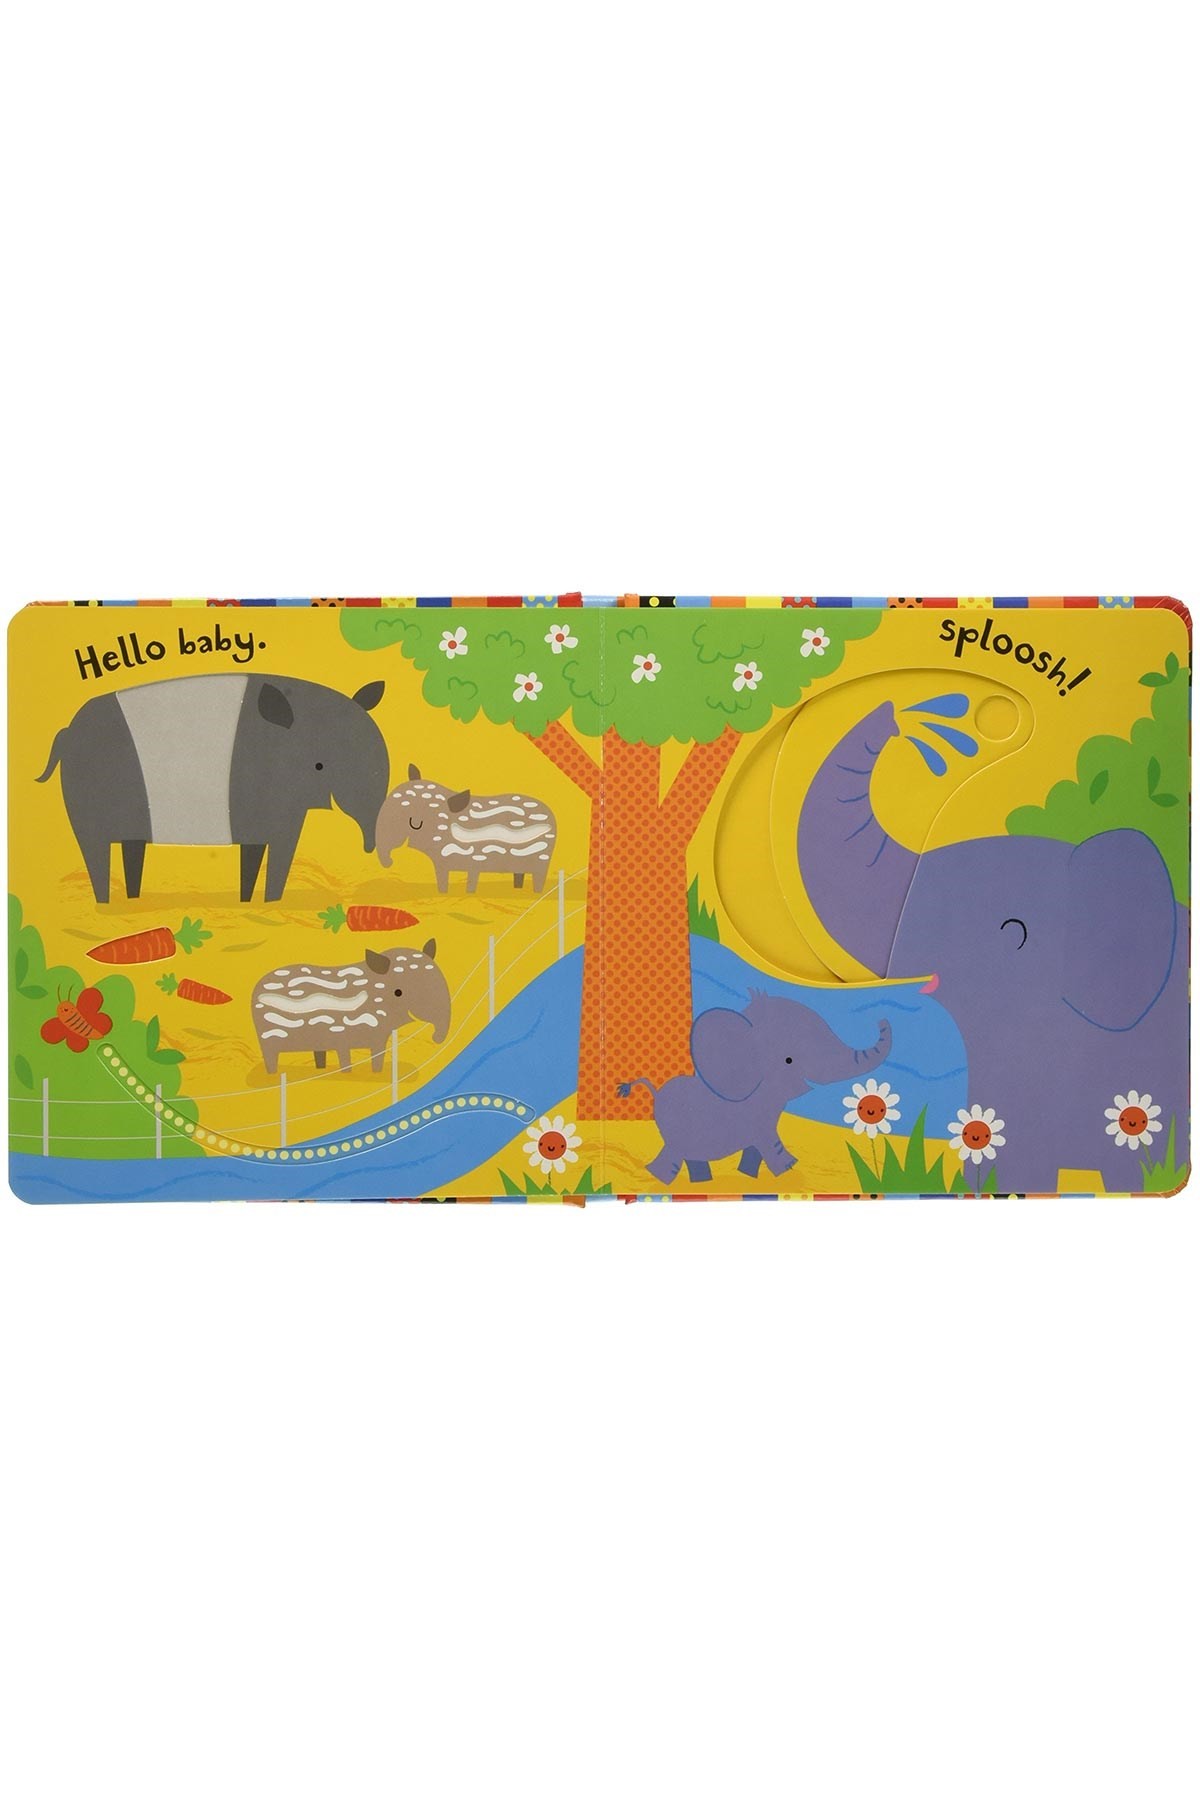 The Usborne BVF Slide and See Zoo